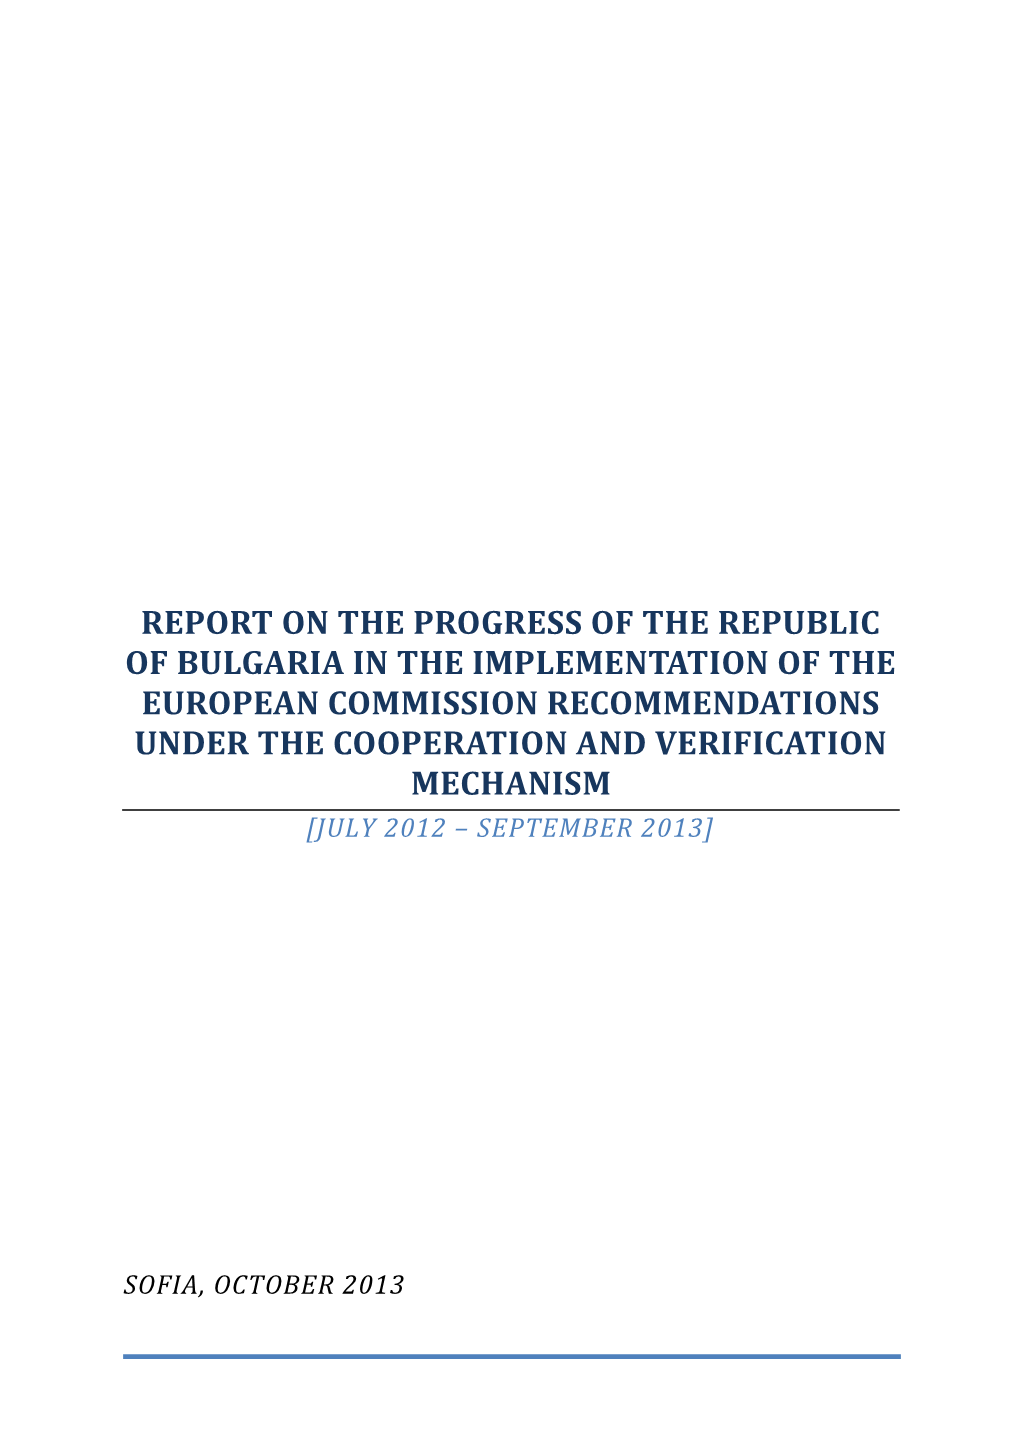 Report on the Progress of the Republic of Bulgaria in the Implementation of the European